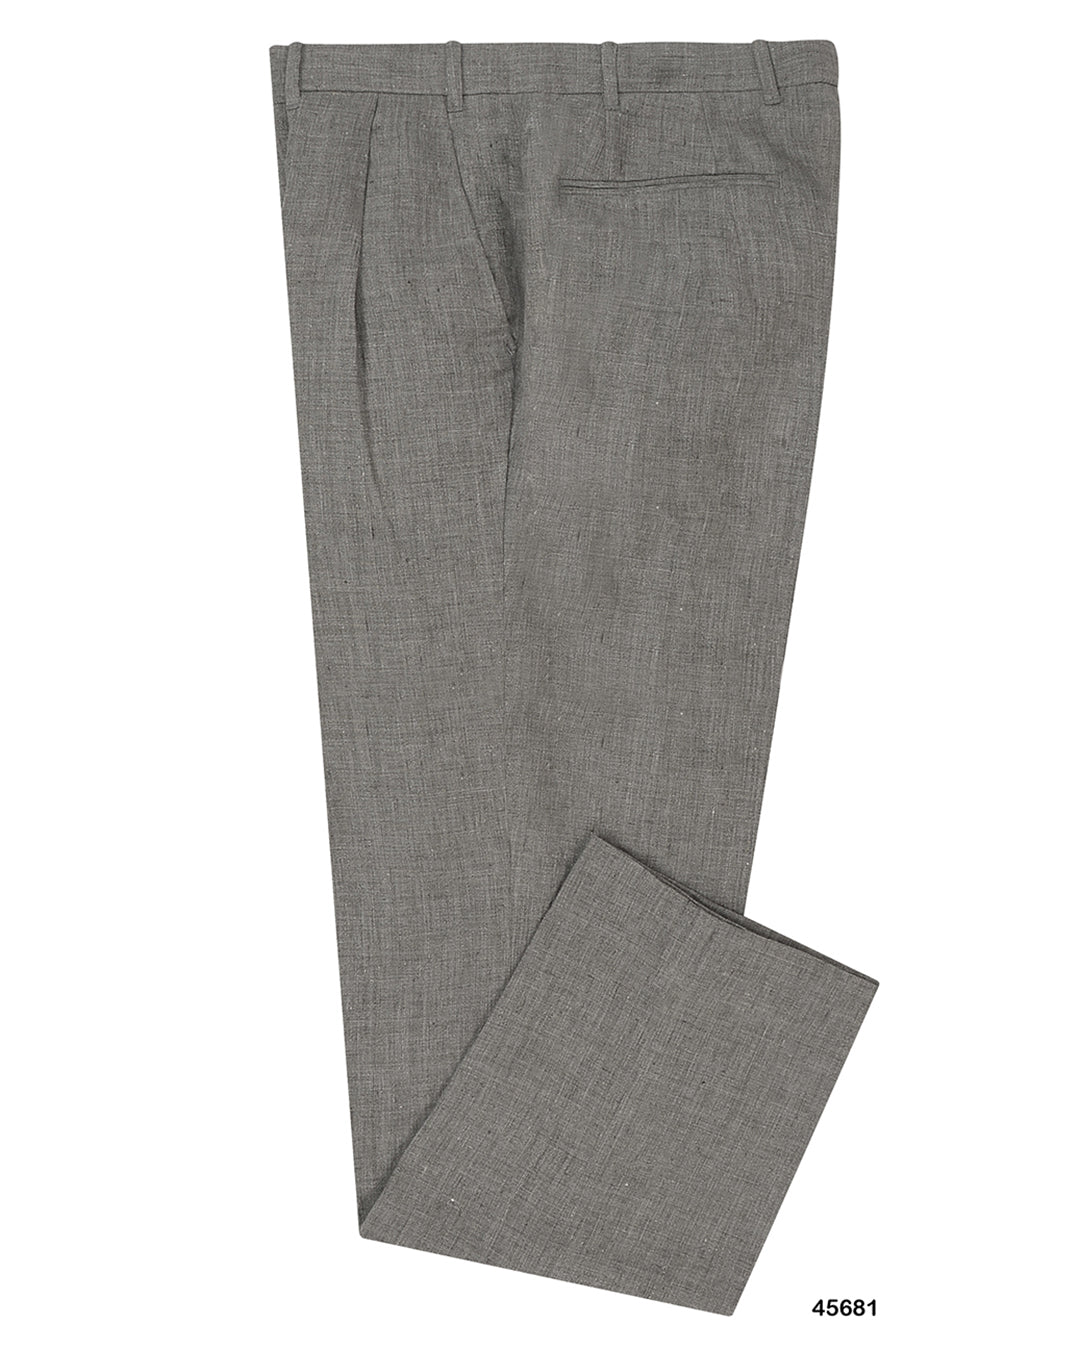 Side view of custom linen pants for men by Luxire in stone grey